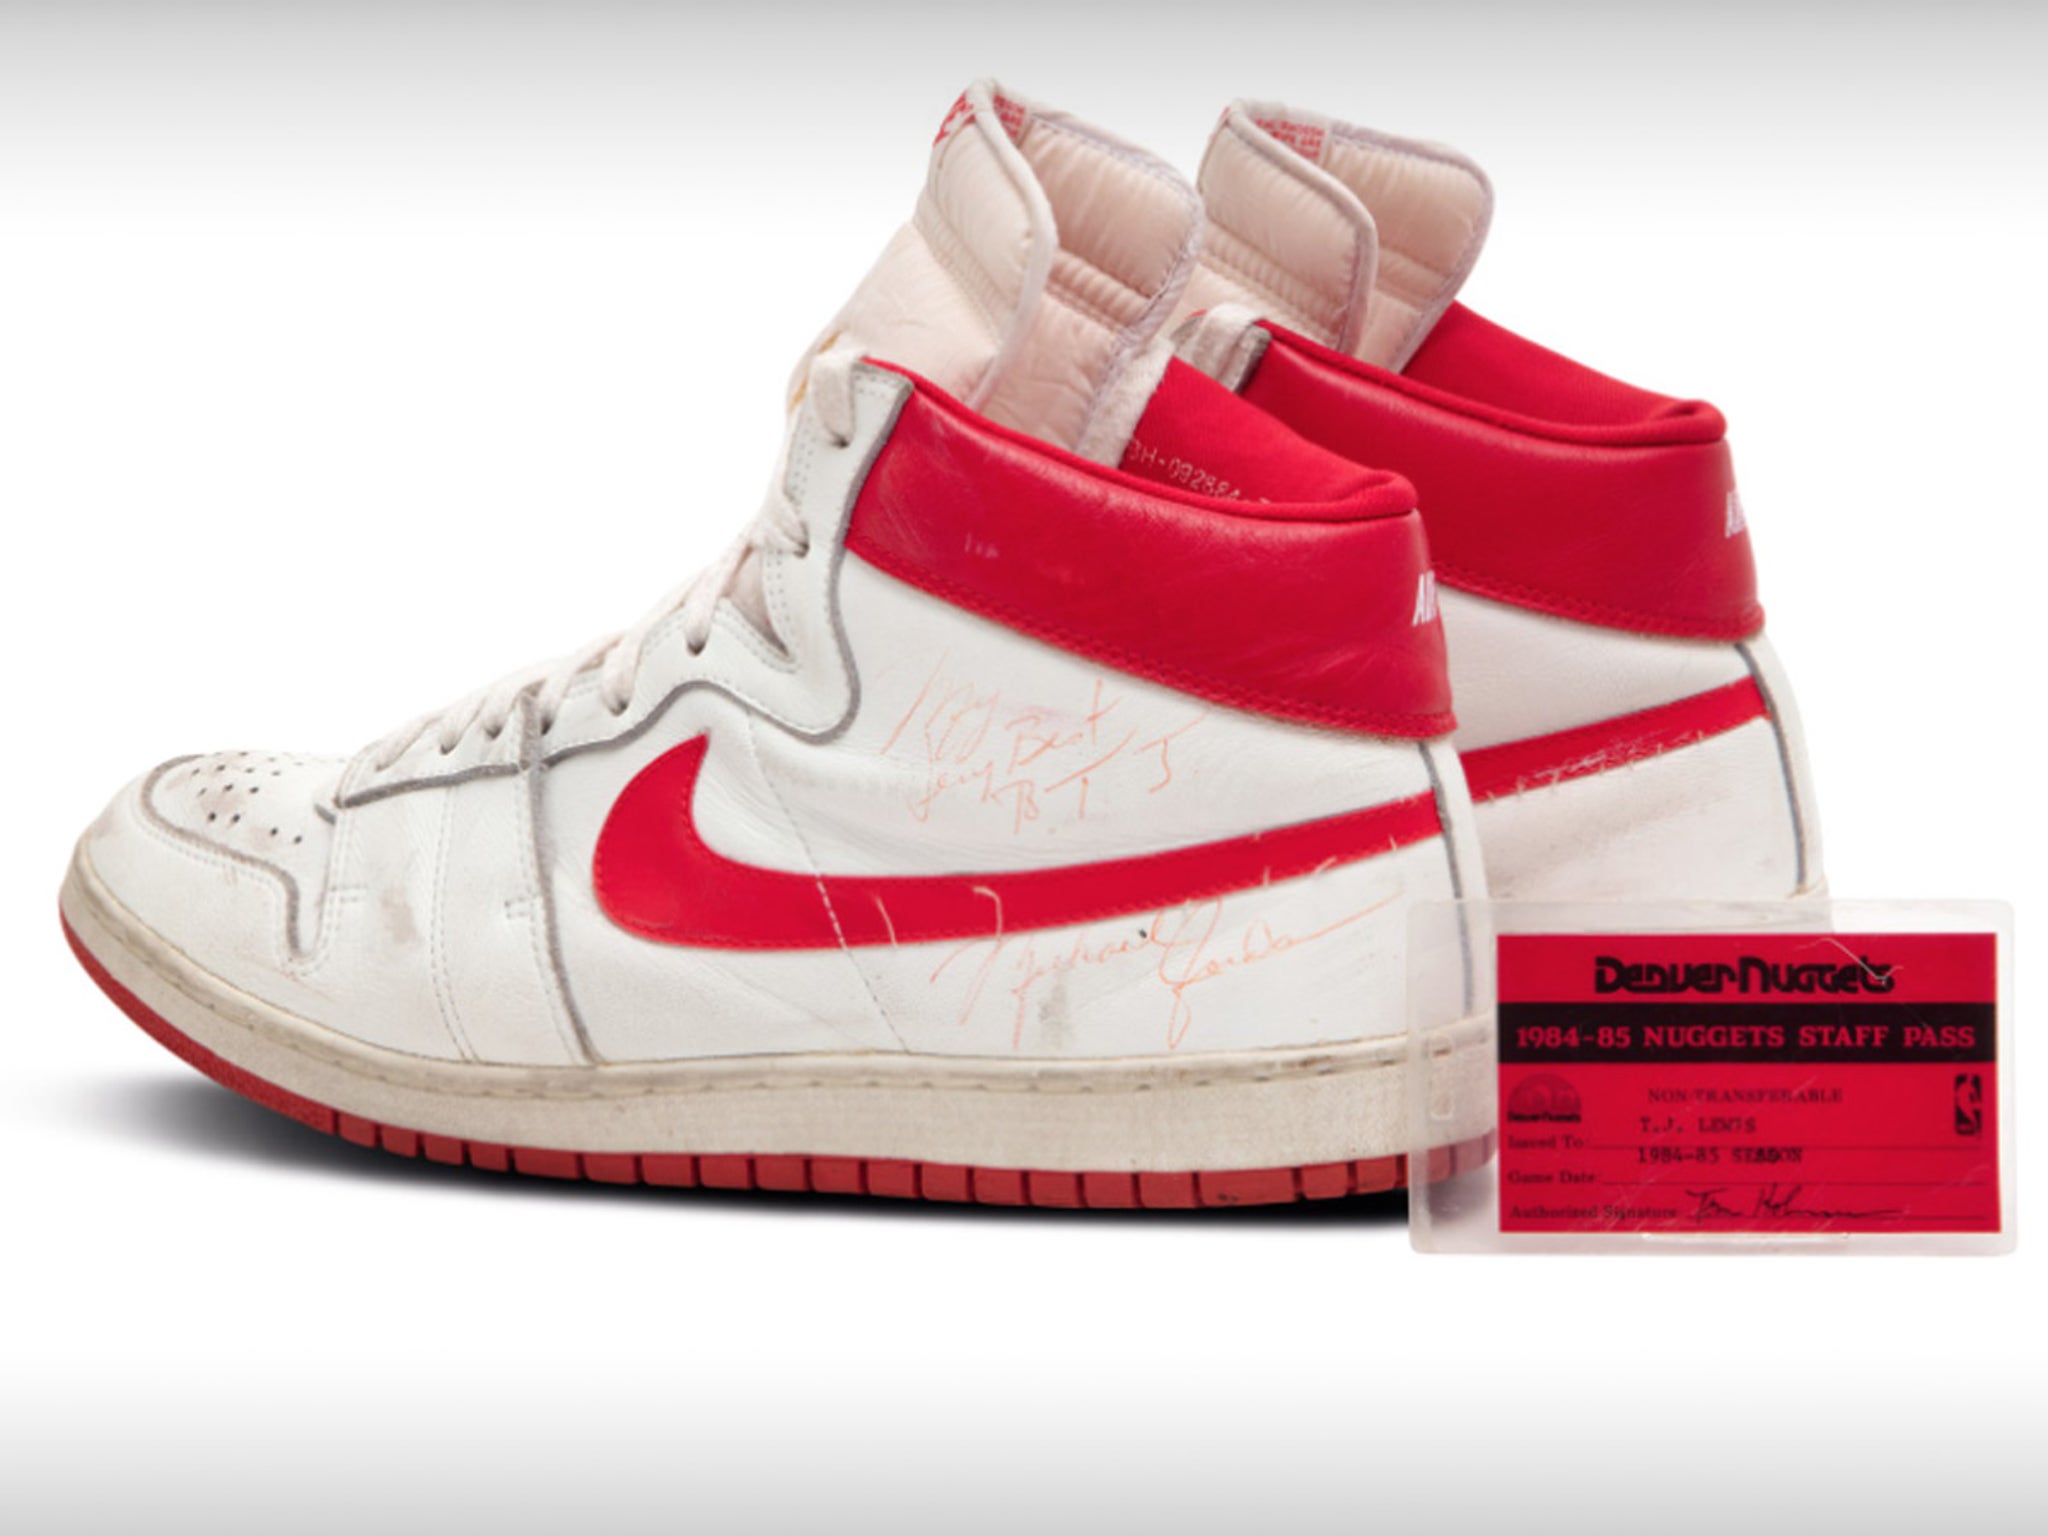 Signed Nike Air Jordan 1s become most expensive sneakers sold at